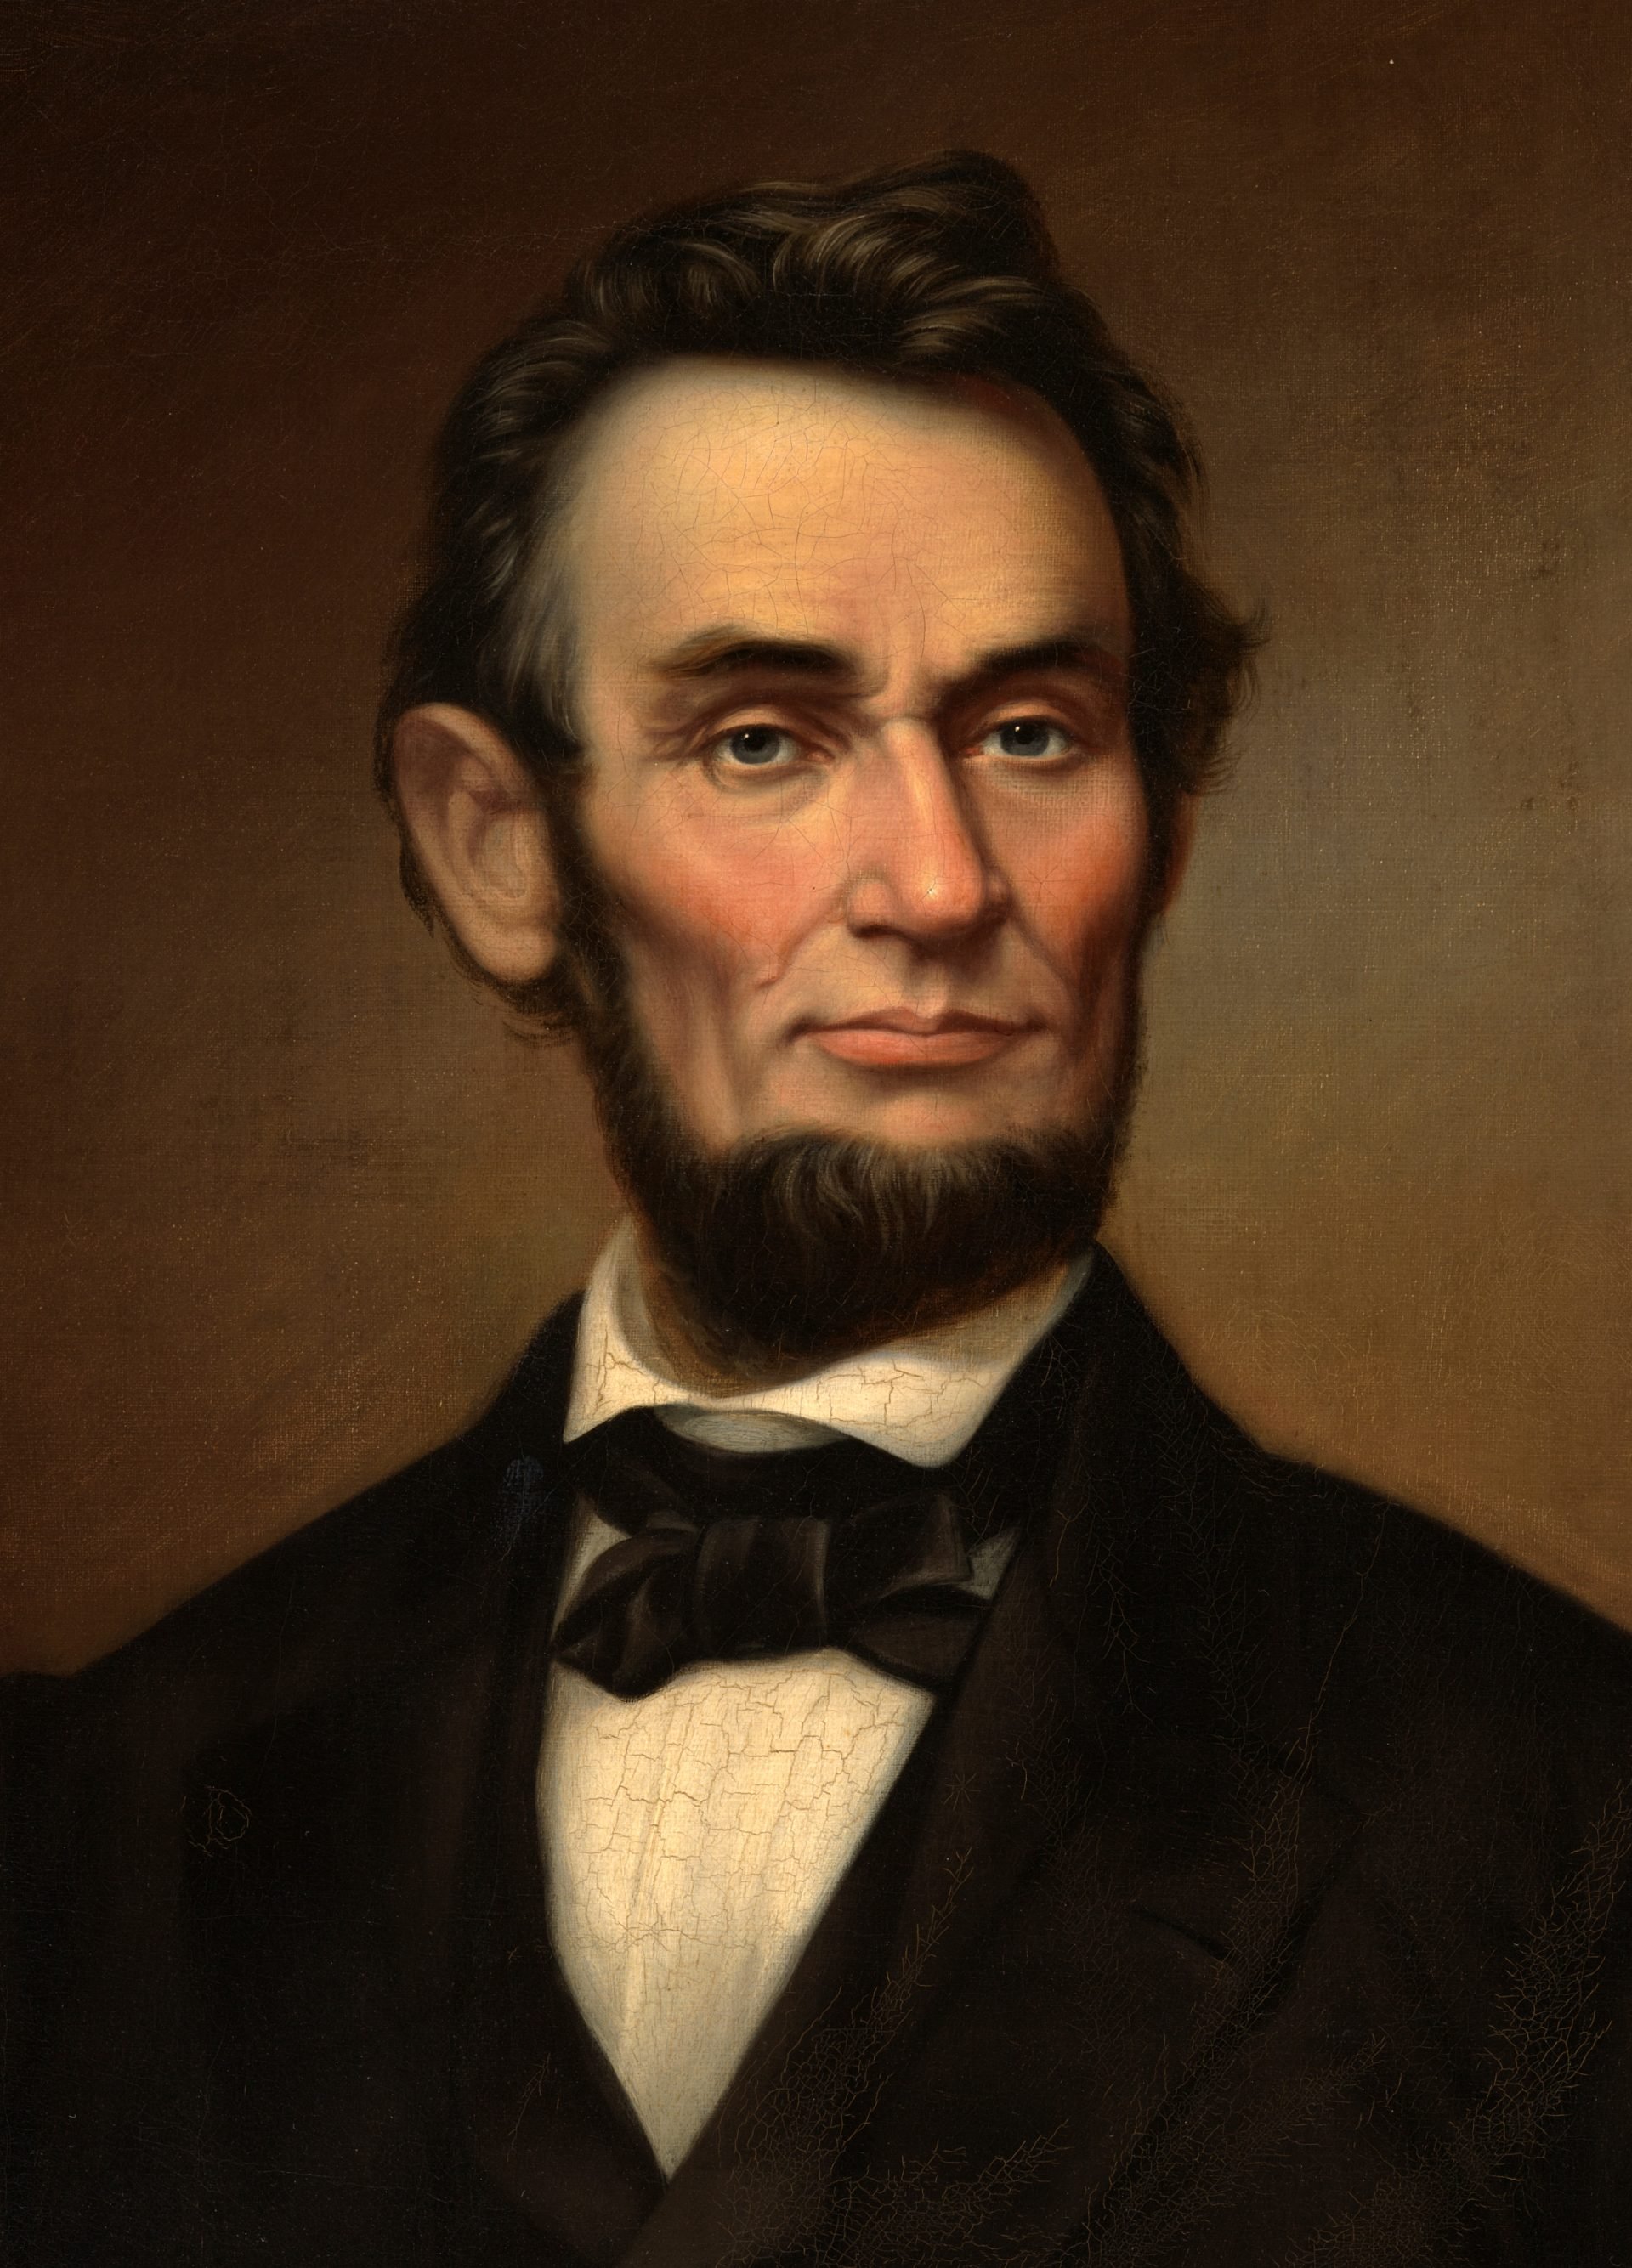 Portrait of Abraham Lincoln, painted by George Victor Cooper in 1865. Lincoln is depicted with a solemn expression, his dark hair combed to the side, and sporting his iconic beard without a mustache. He is dressed in a black suit with a bow tie and a white collared shirt. The painting has a plain brown background, and there are visible craquelure patterns across the canvas, indicative of the painting's age.